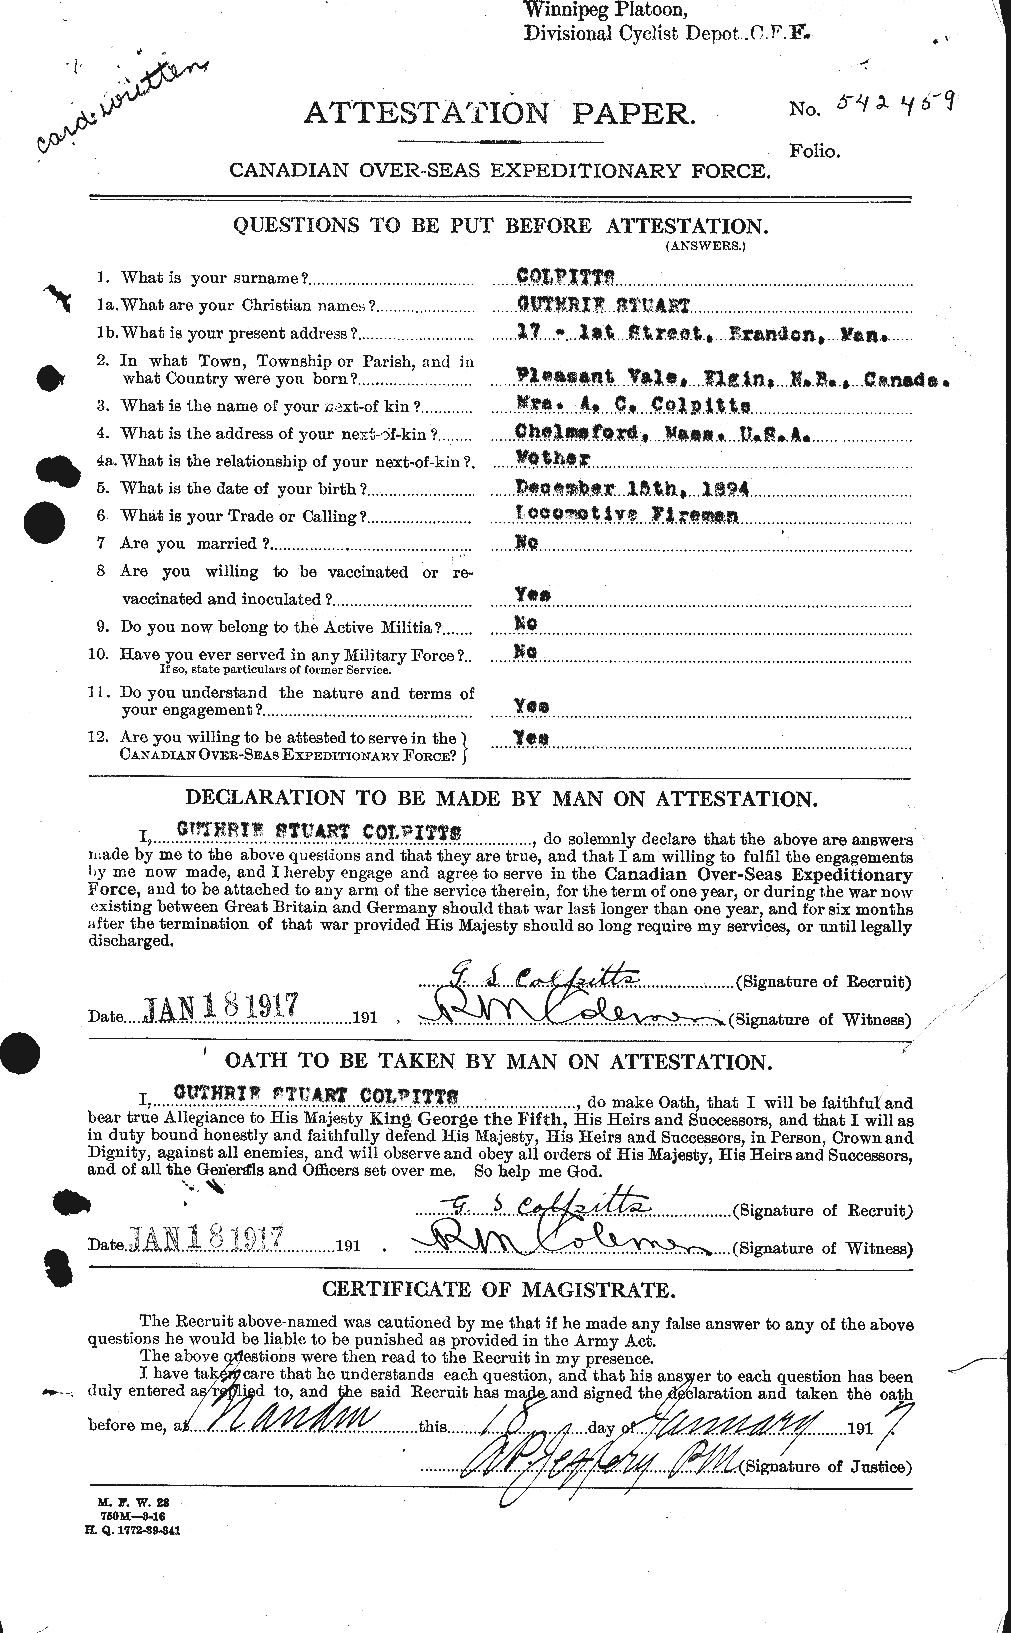 Personnel Records of the First World War - CEF 067423a